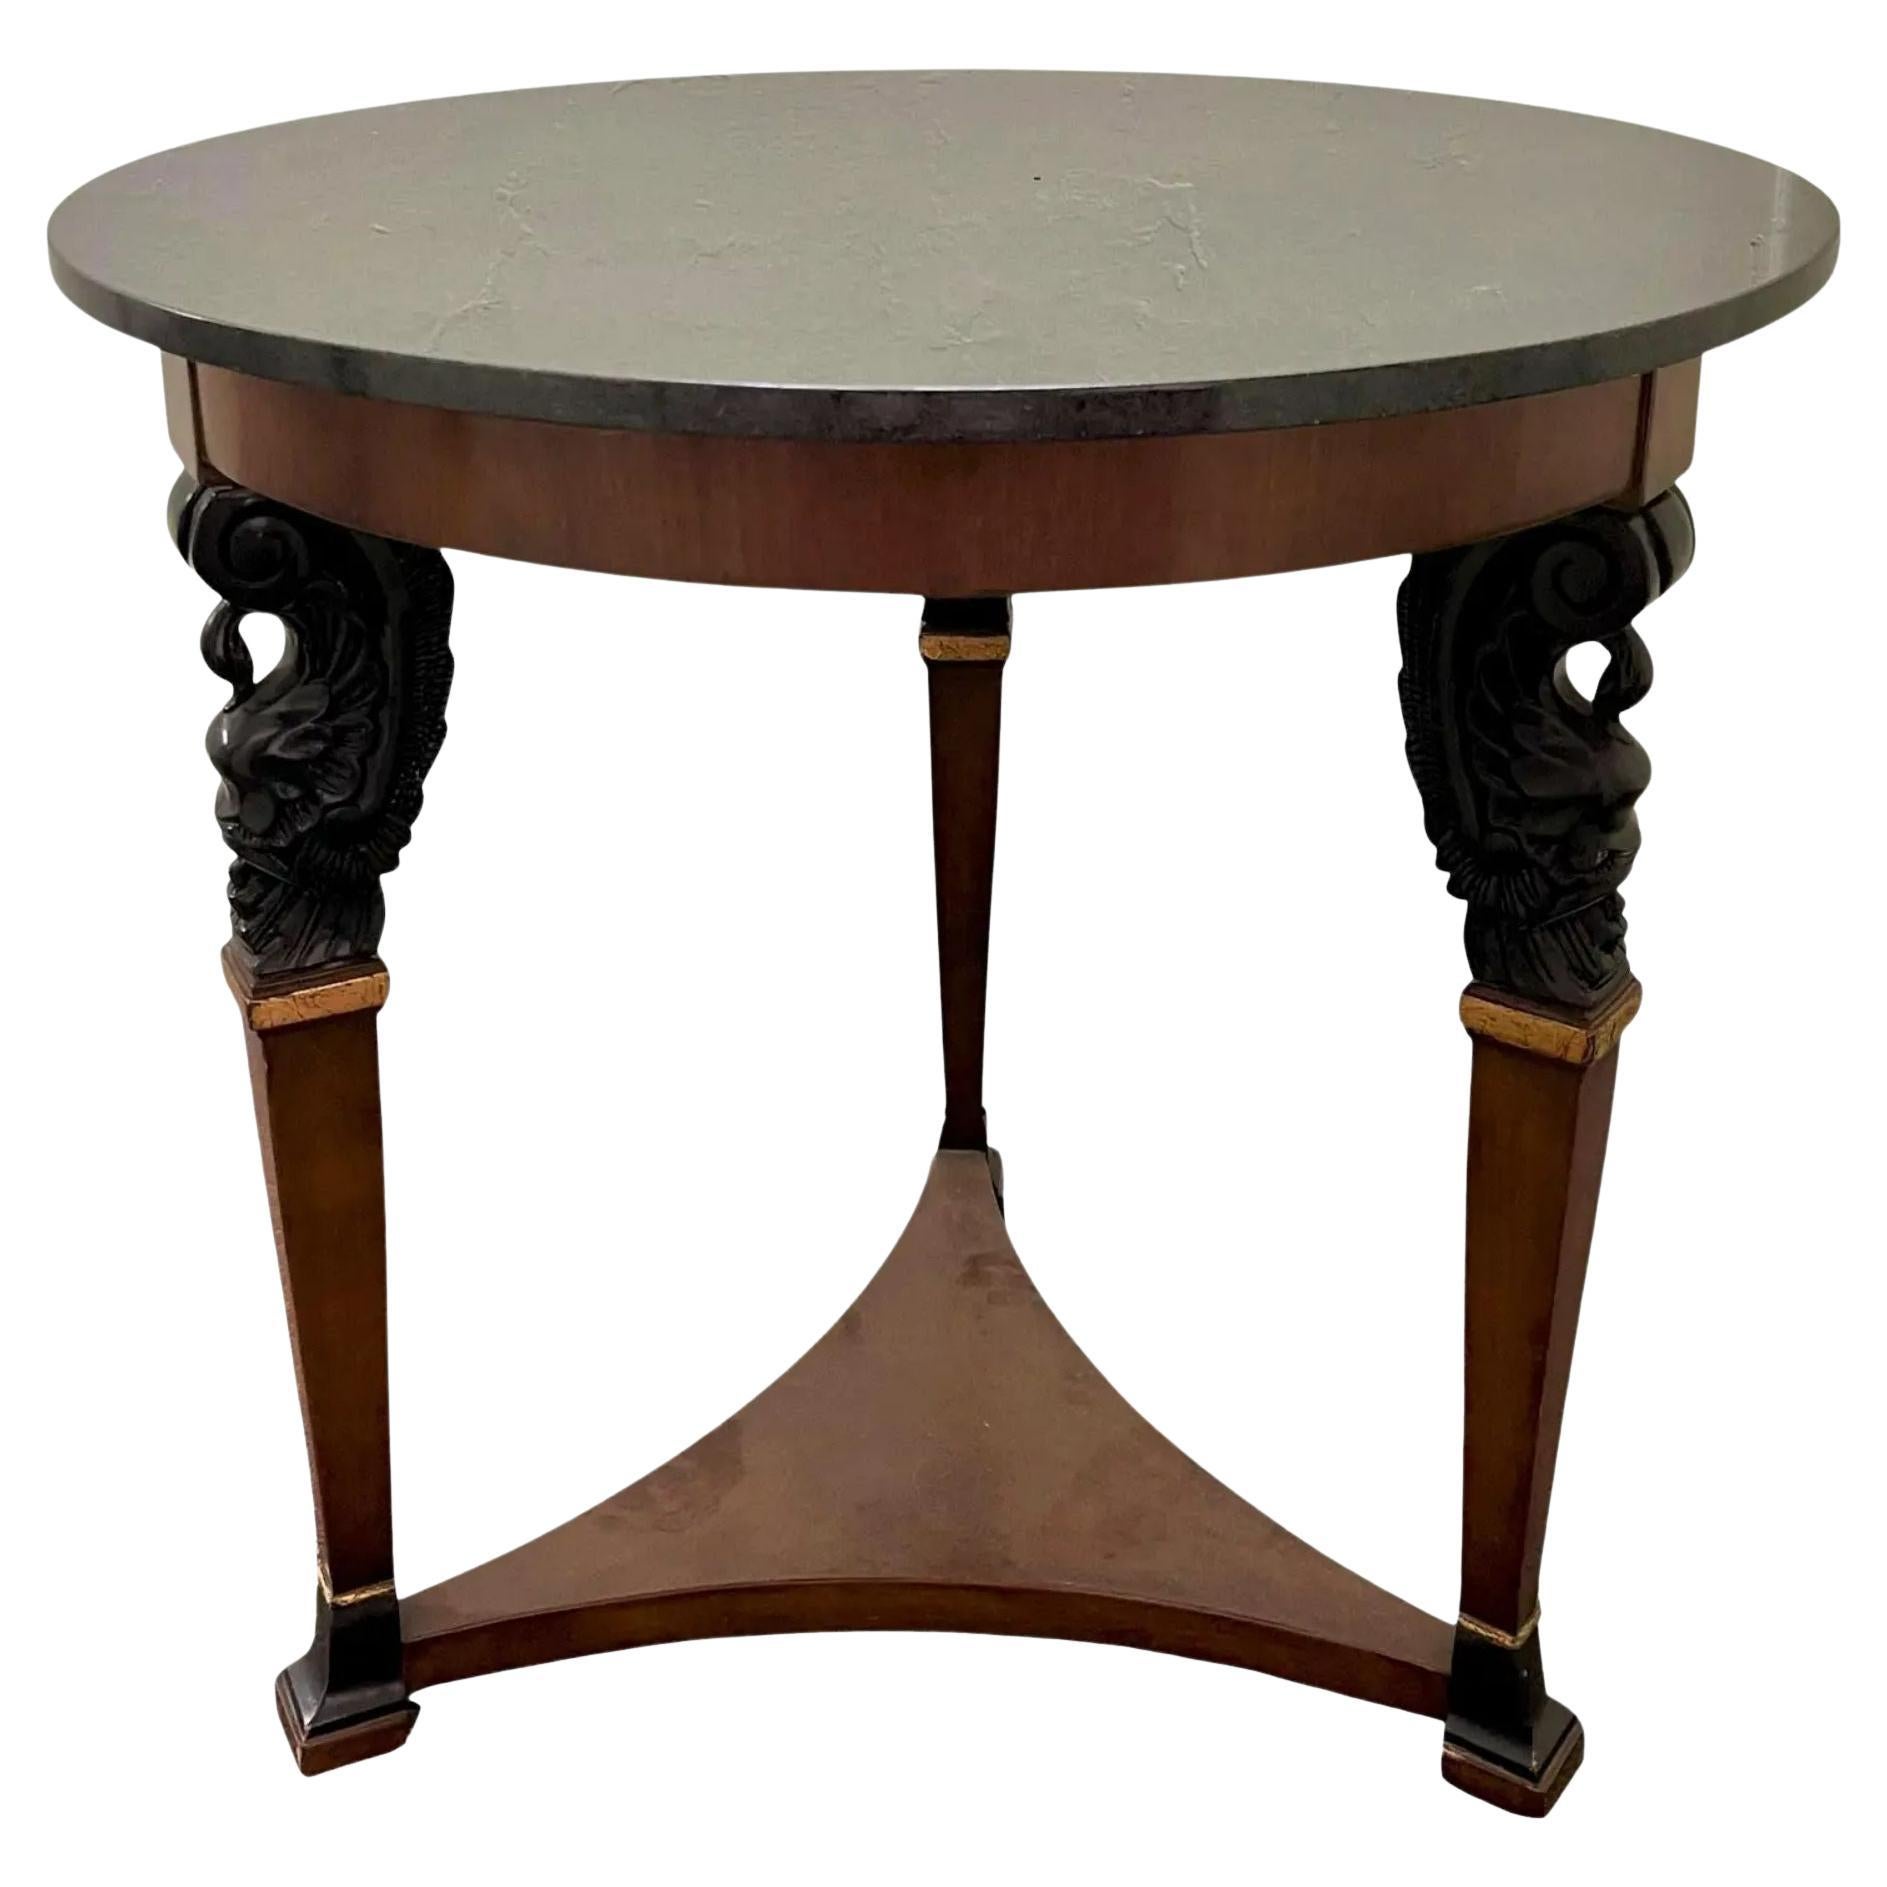 Directoire Style Charles Pollock for William Switzer Marble Top Table